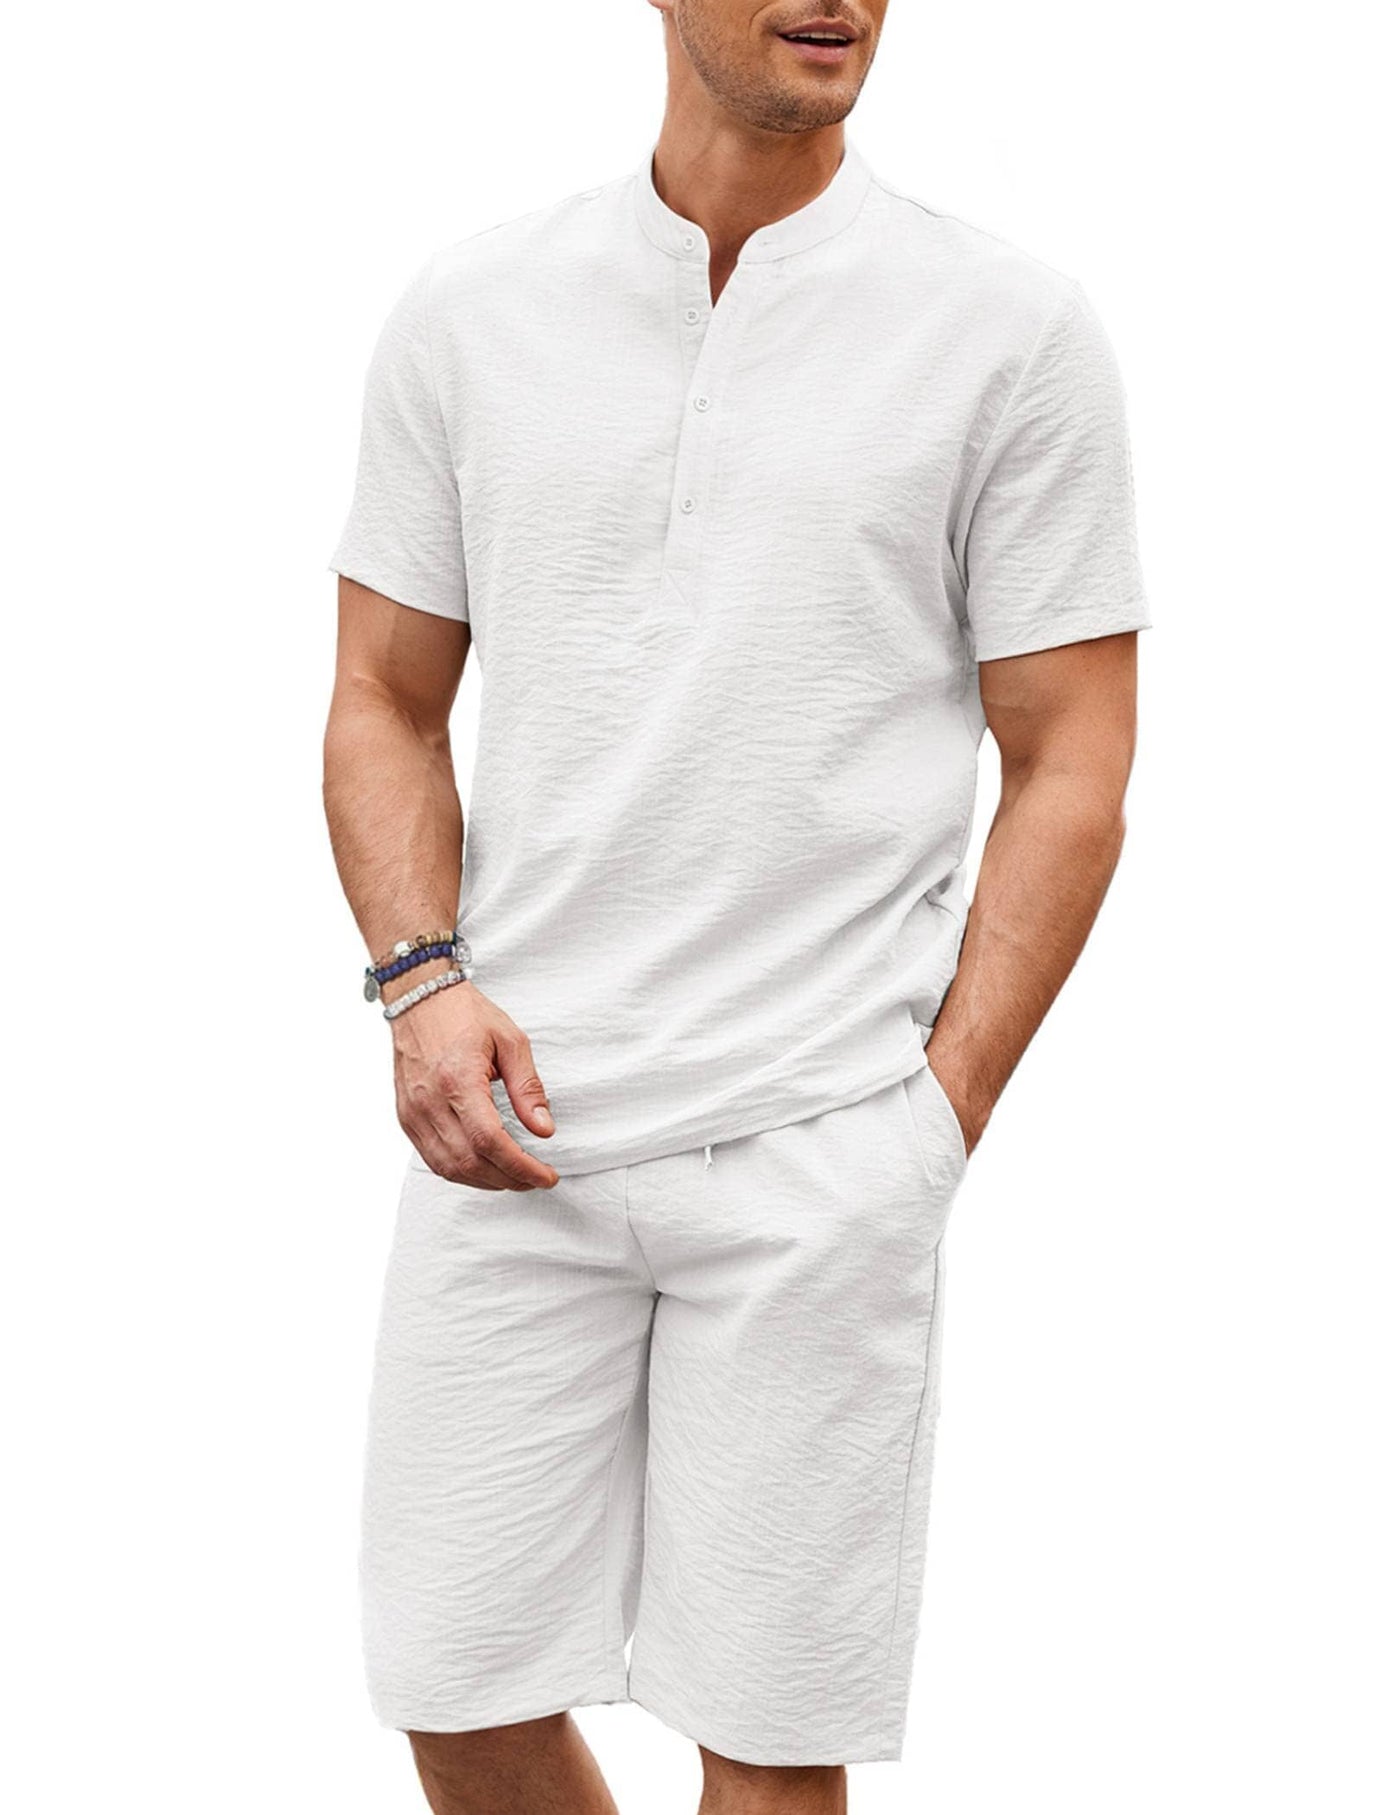 Casual 2 Pieces Cotton Linen Henley Shirt Set (US Only) Sets coofandy White S 